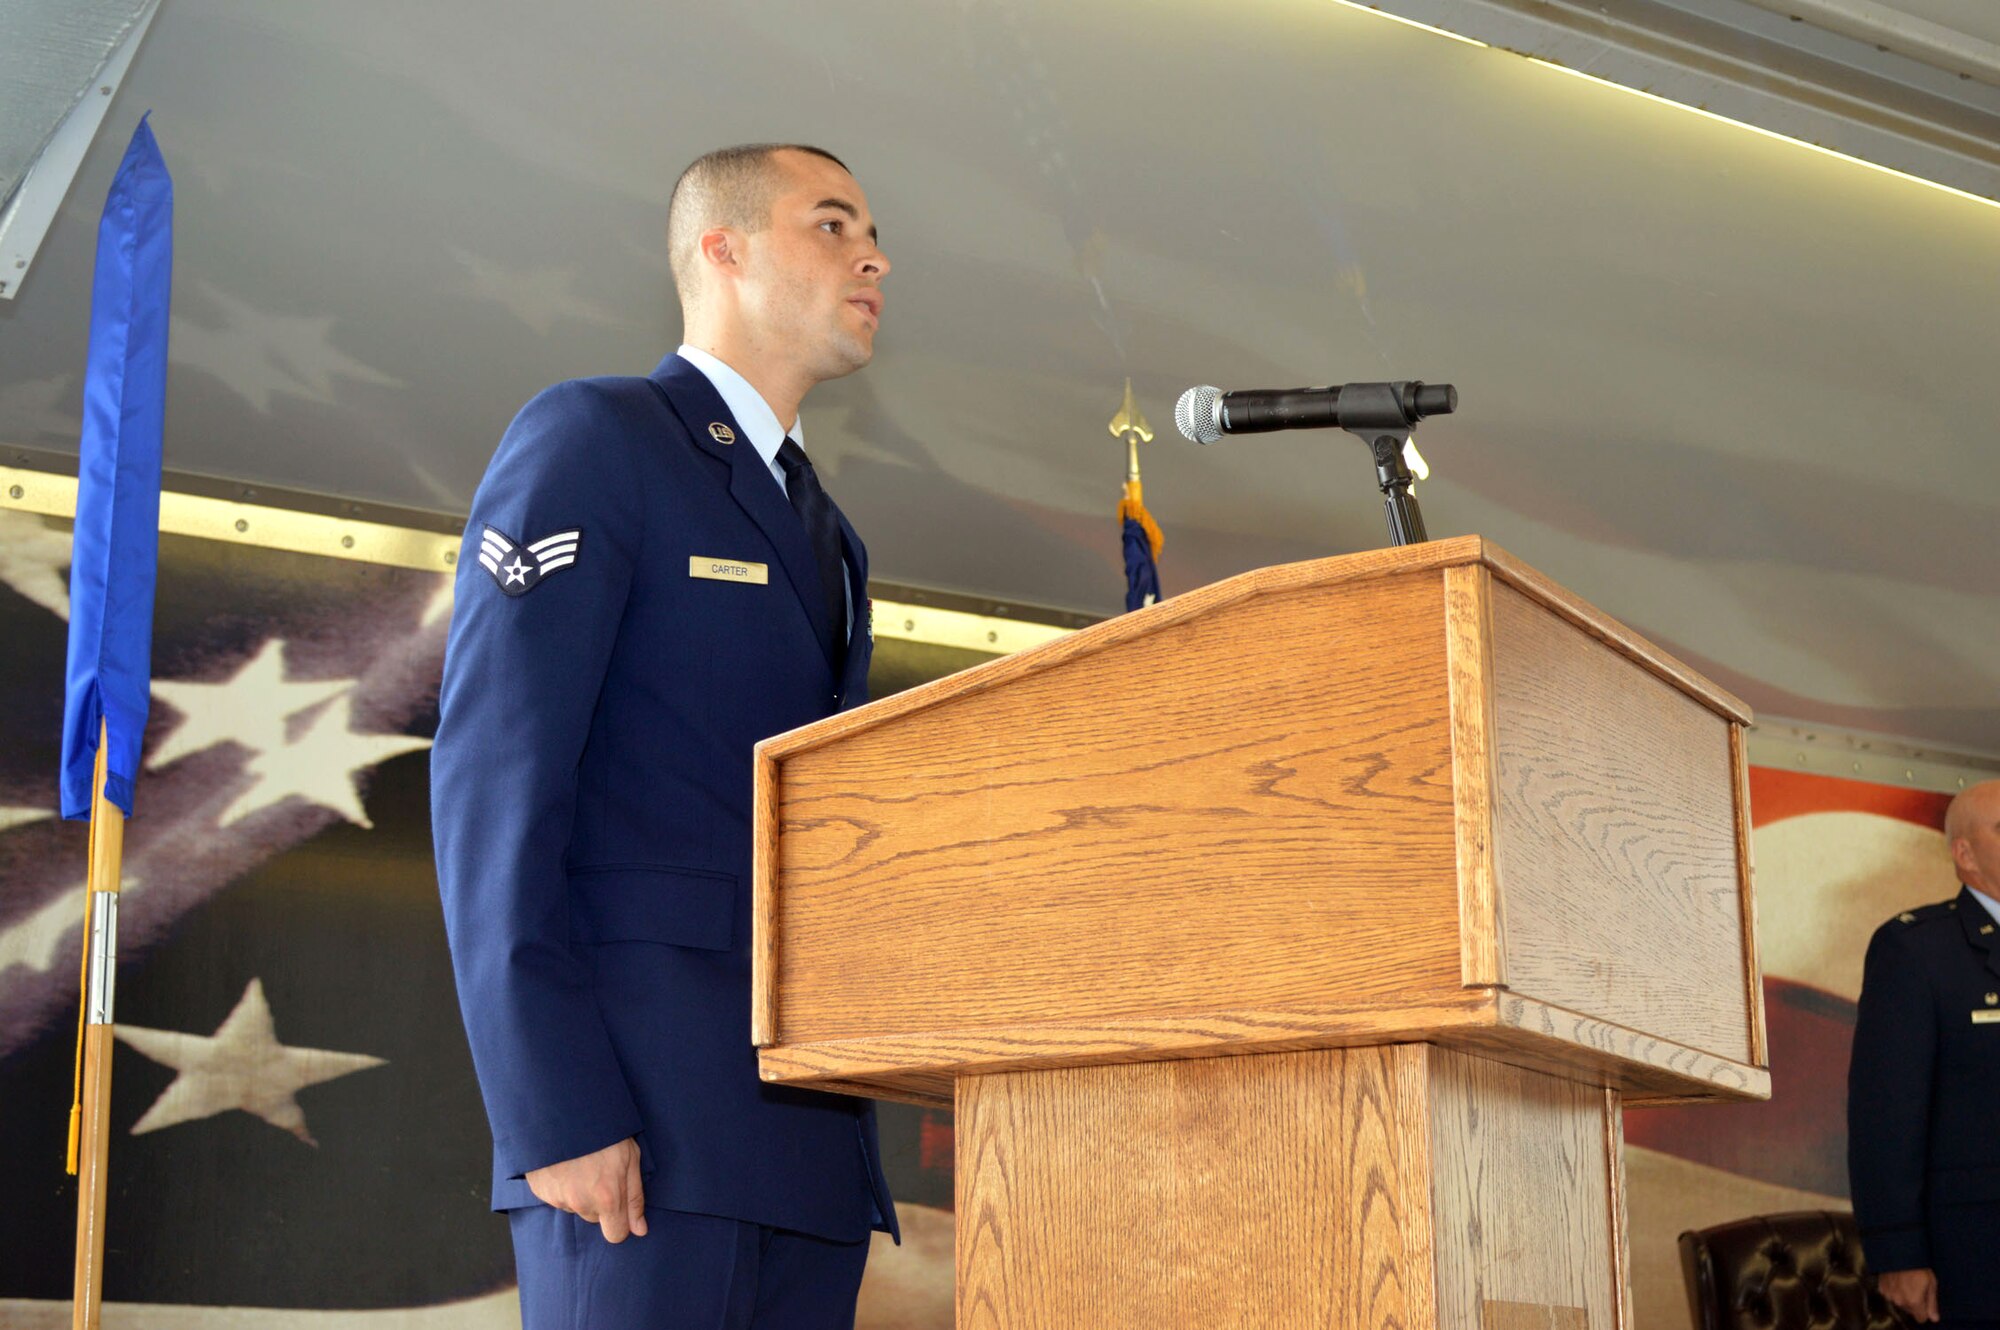 Senior Airman Anthony Carter, 43rd Air Base Squadron, sings the National Anthem during the 43rd ABS redesignation and change of command ceremony July 1, 2015, at Pope Army Airfield, North Carolina. Logistics and force support Airmen and functions transferred to the newly established 43rd ABS from the inactivated 43rd Logistics Readiness Squadron and the 43rd Force Support Squadron. (U.S. Air Force photo/Marvin Krause)